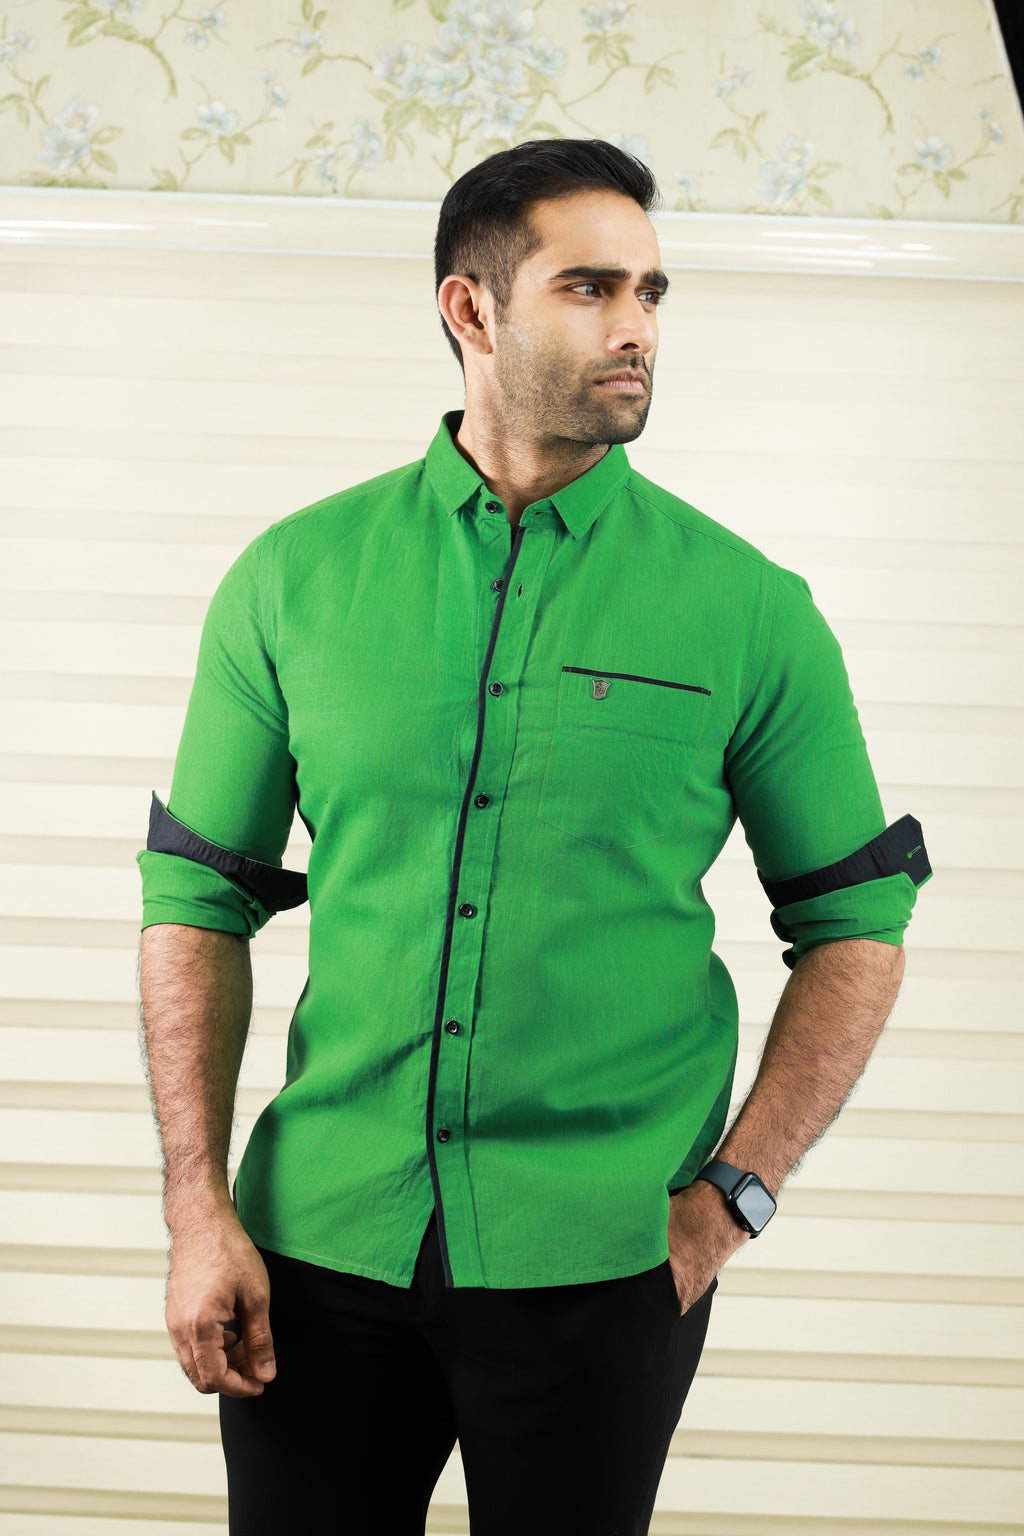 Black Jeans with Dark Green Shirt Outfits For Men 60 ideas  outfits   Lookastic